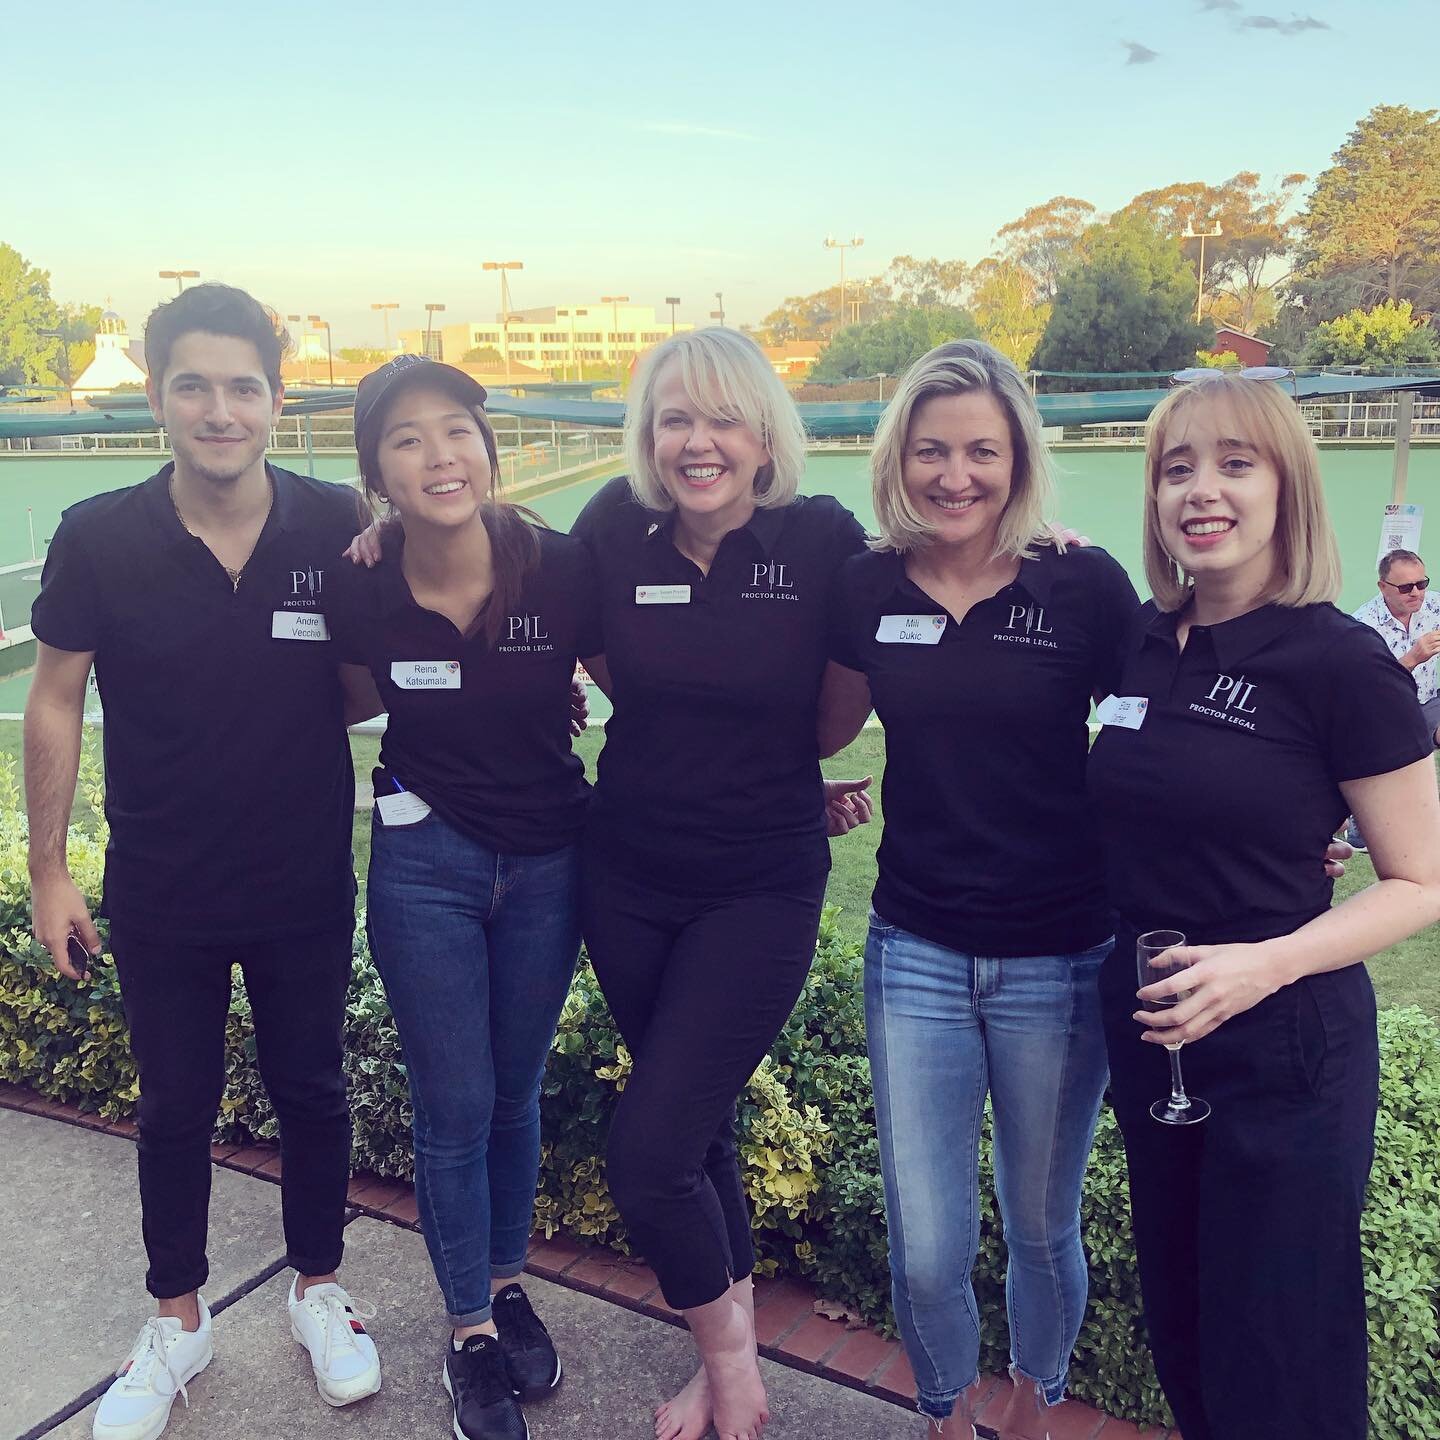 🎱Proctor Legal Twilight Bowls🎱 Supporting @canberrahospitalfoundation #cangiveday and celebrating #3yearsold 🥳
HUGE shout out to our wonderful clients 👏 and generous sponsors 💰for coming along yesterday to support such a special cause! ☀️

#than